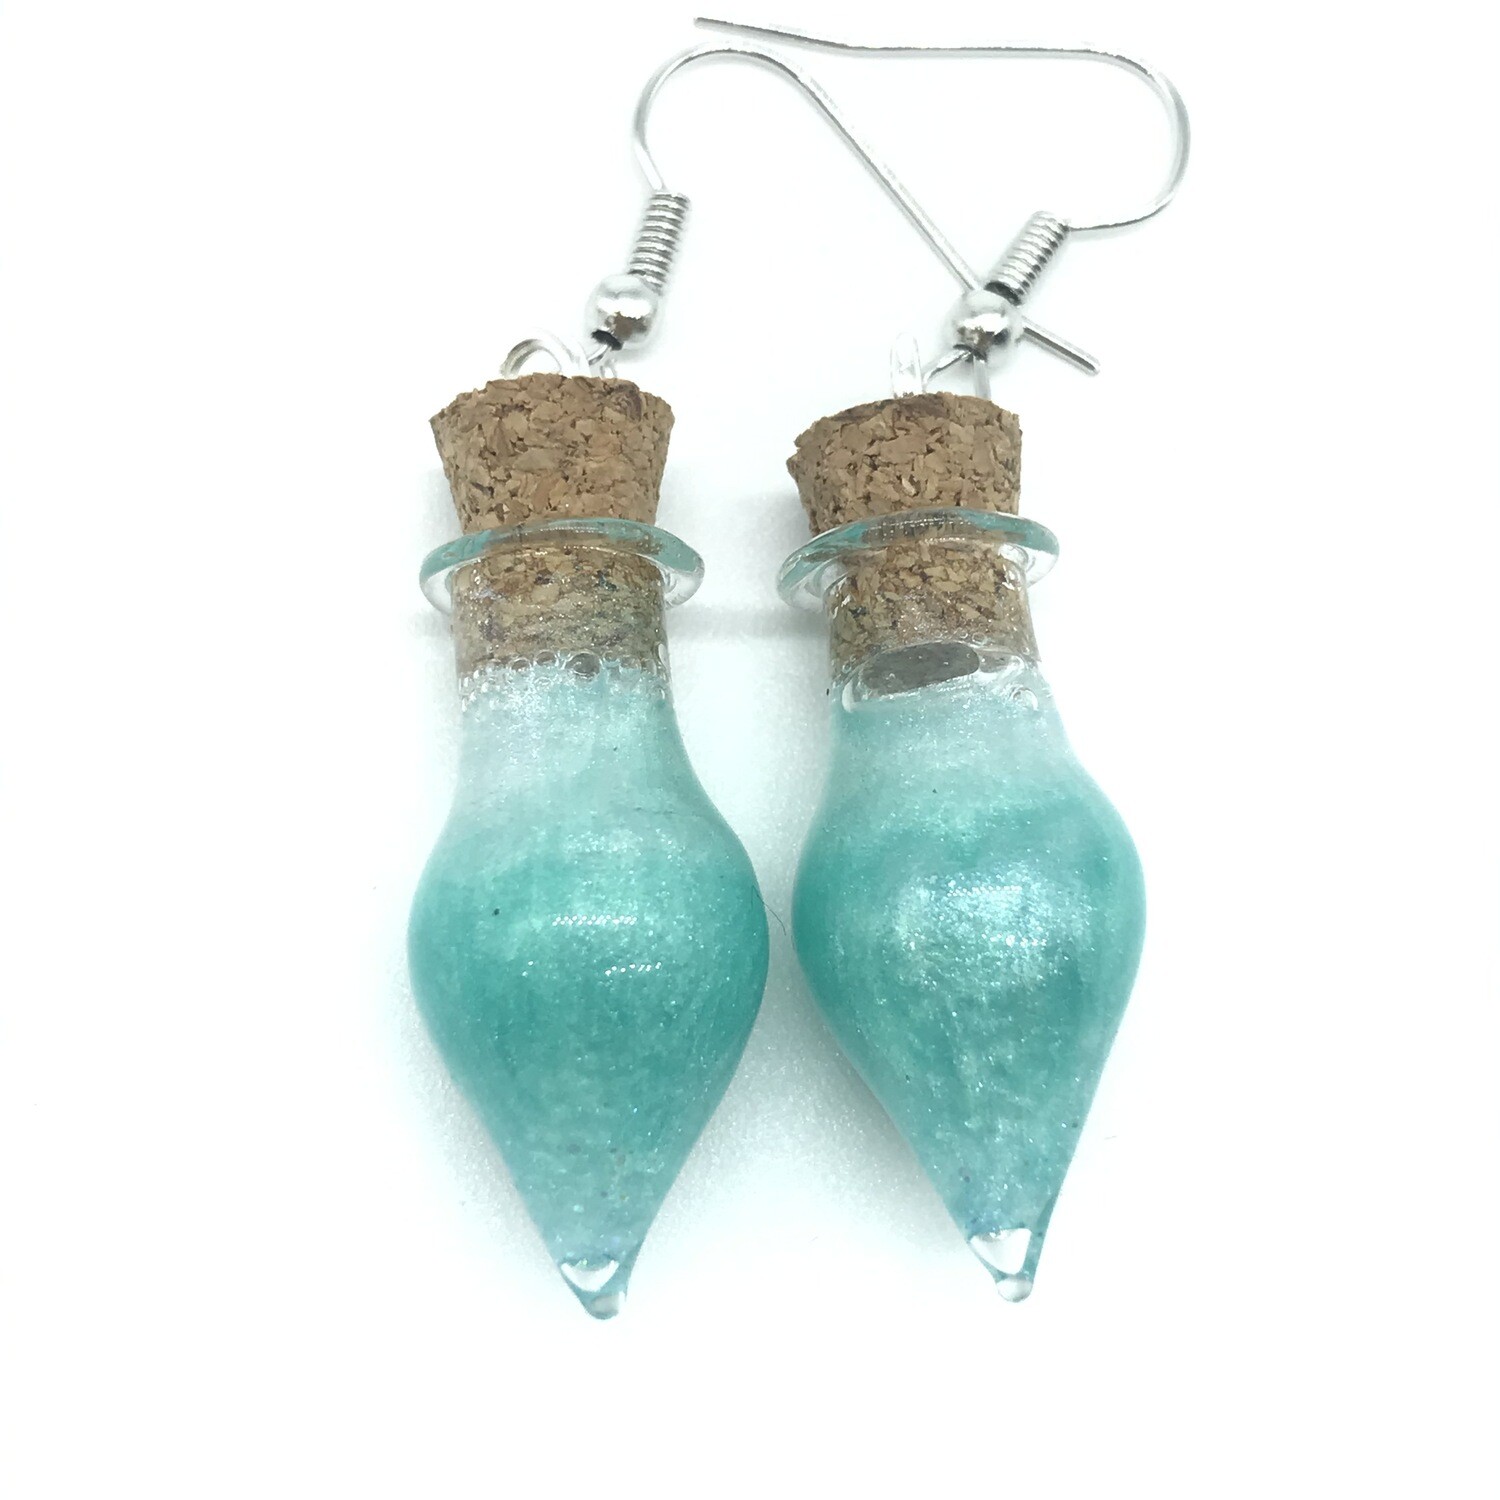 Potion Earrings - Teal and white, drop bottle